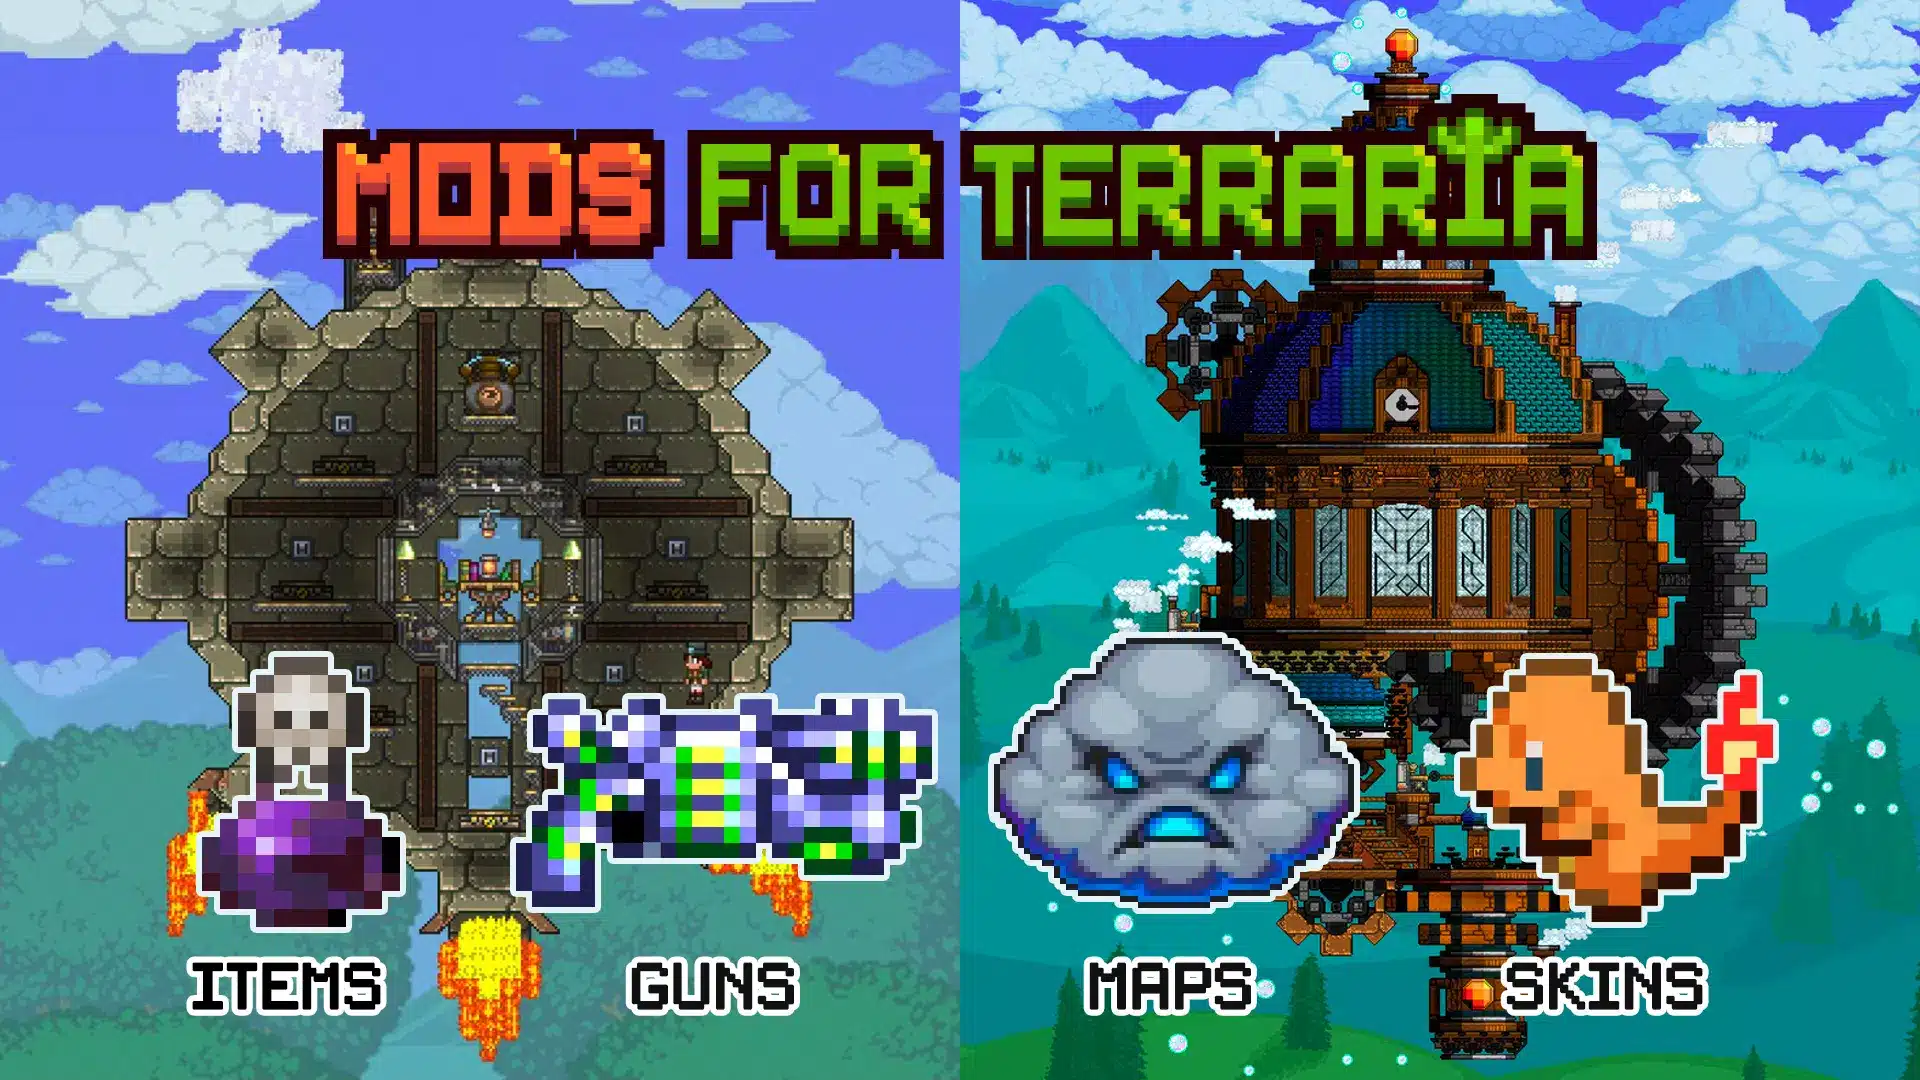 Mods for Terraria – Map n Skin Image 1